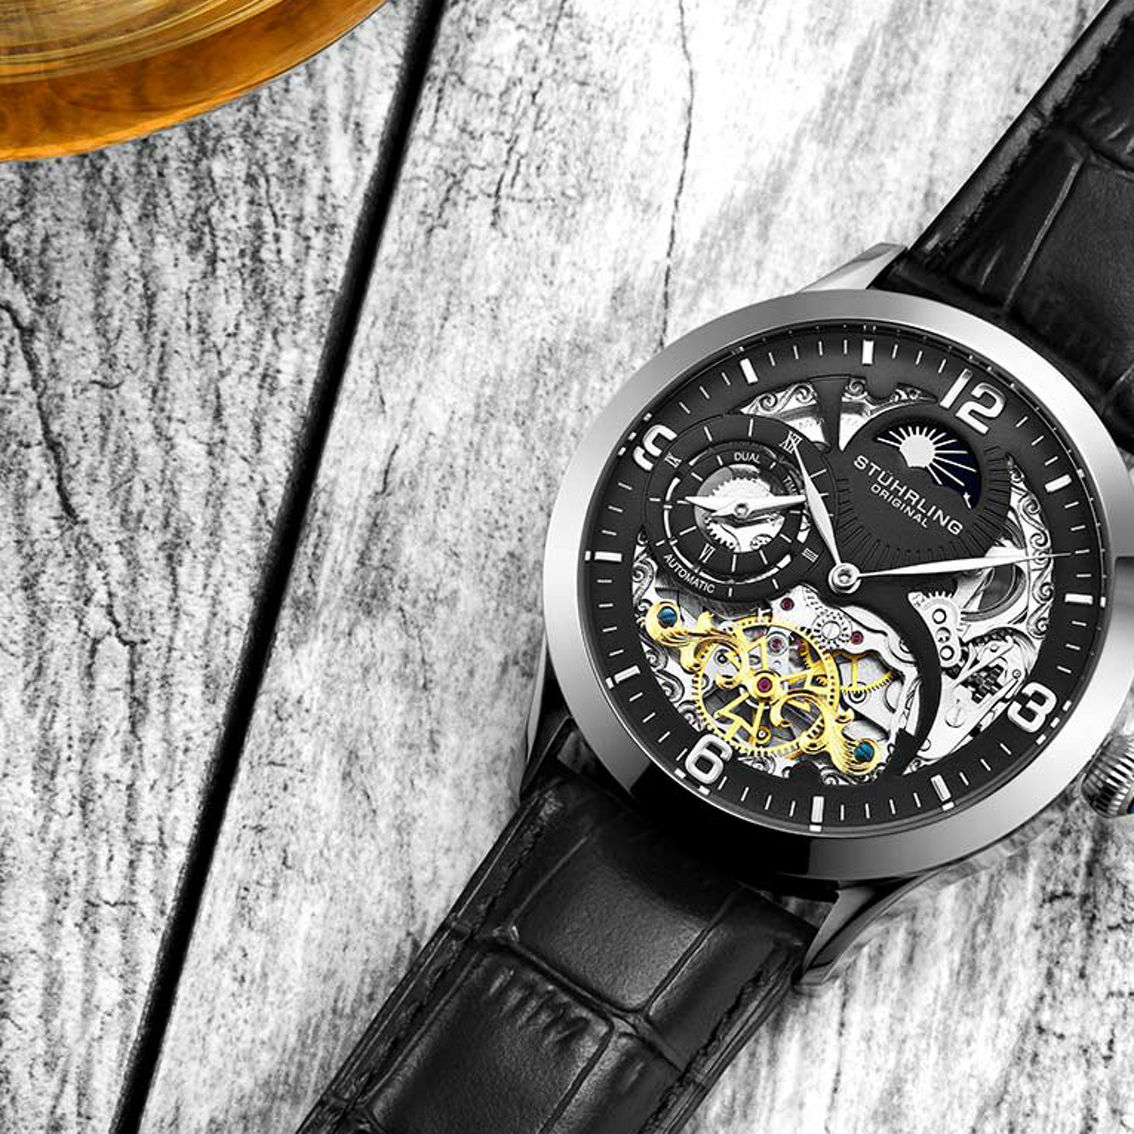 Stührling Original Special Reserve 3921 Dual Time Automatic 44mm Skeleton Watch - Image 4 of 5